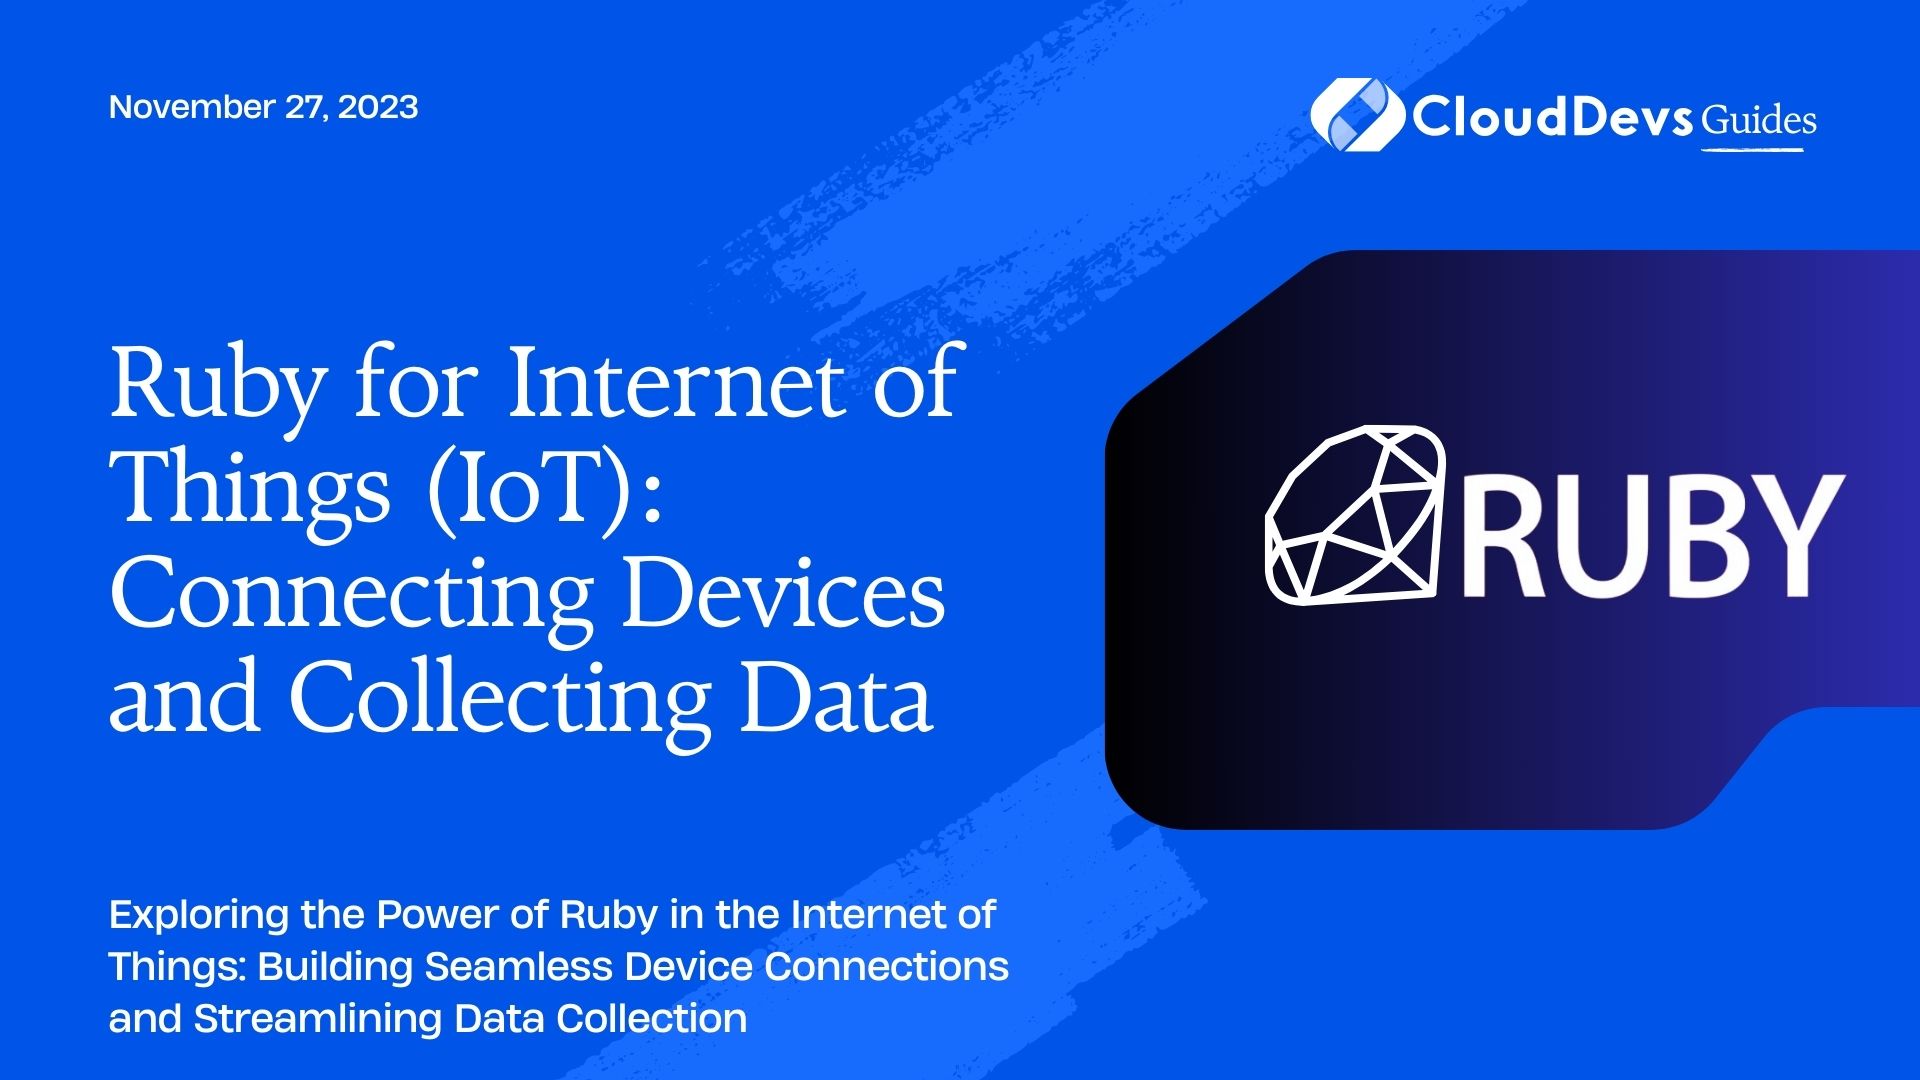 Ruby for Internet of Things (IoT): Connecting Devices and Collecting Data